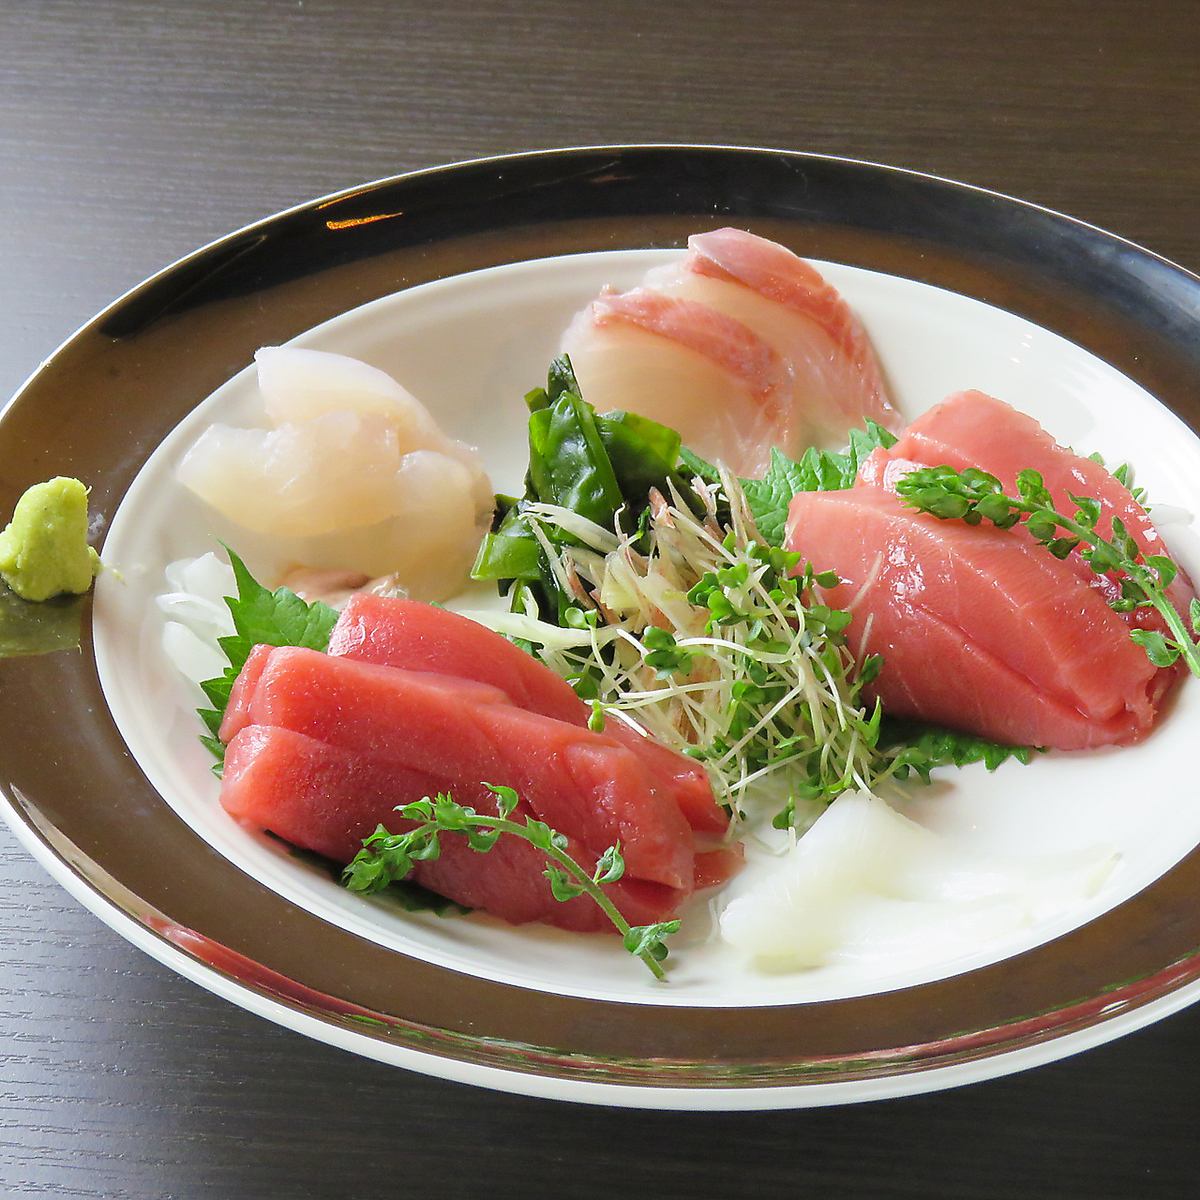 We are proud of our fresh bluefin tuna procured from the tuna wholesaler in Toyosu Market.